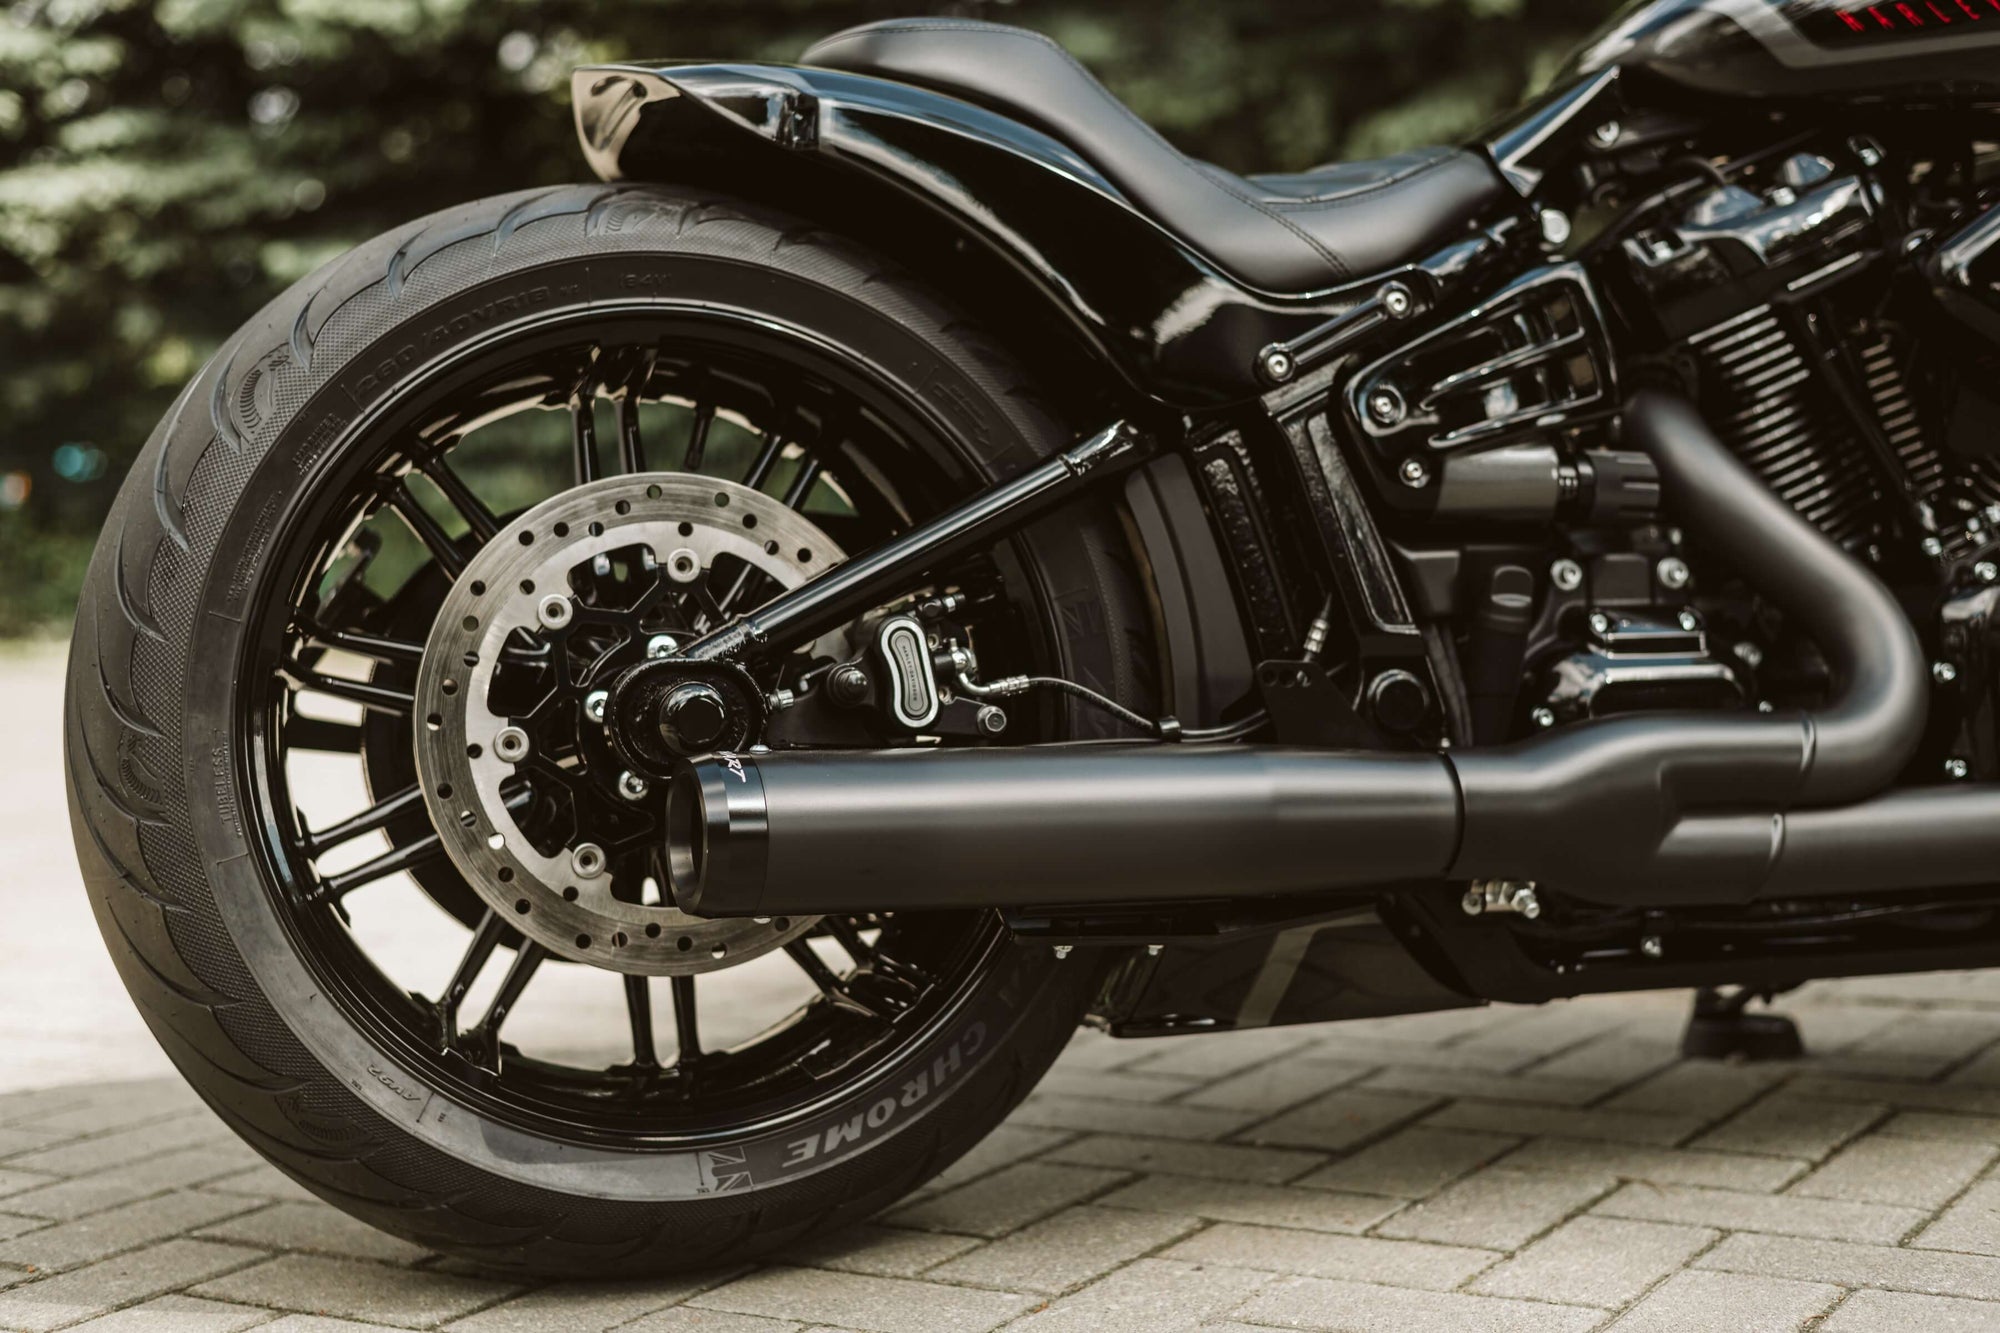 Zoomed Harley Davidson motorcycle with Killer Custom parts from the side blurred nature background